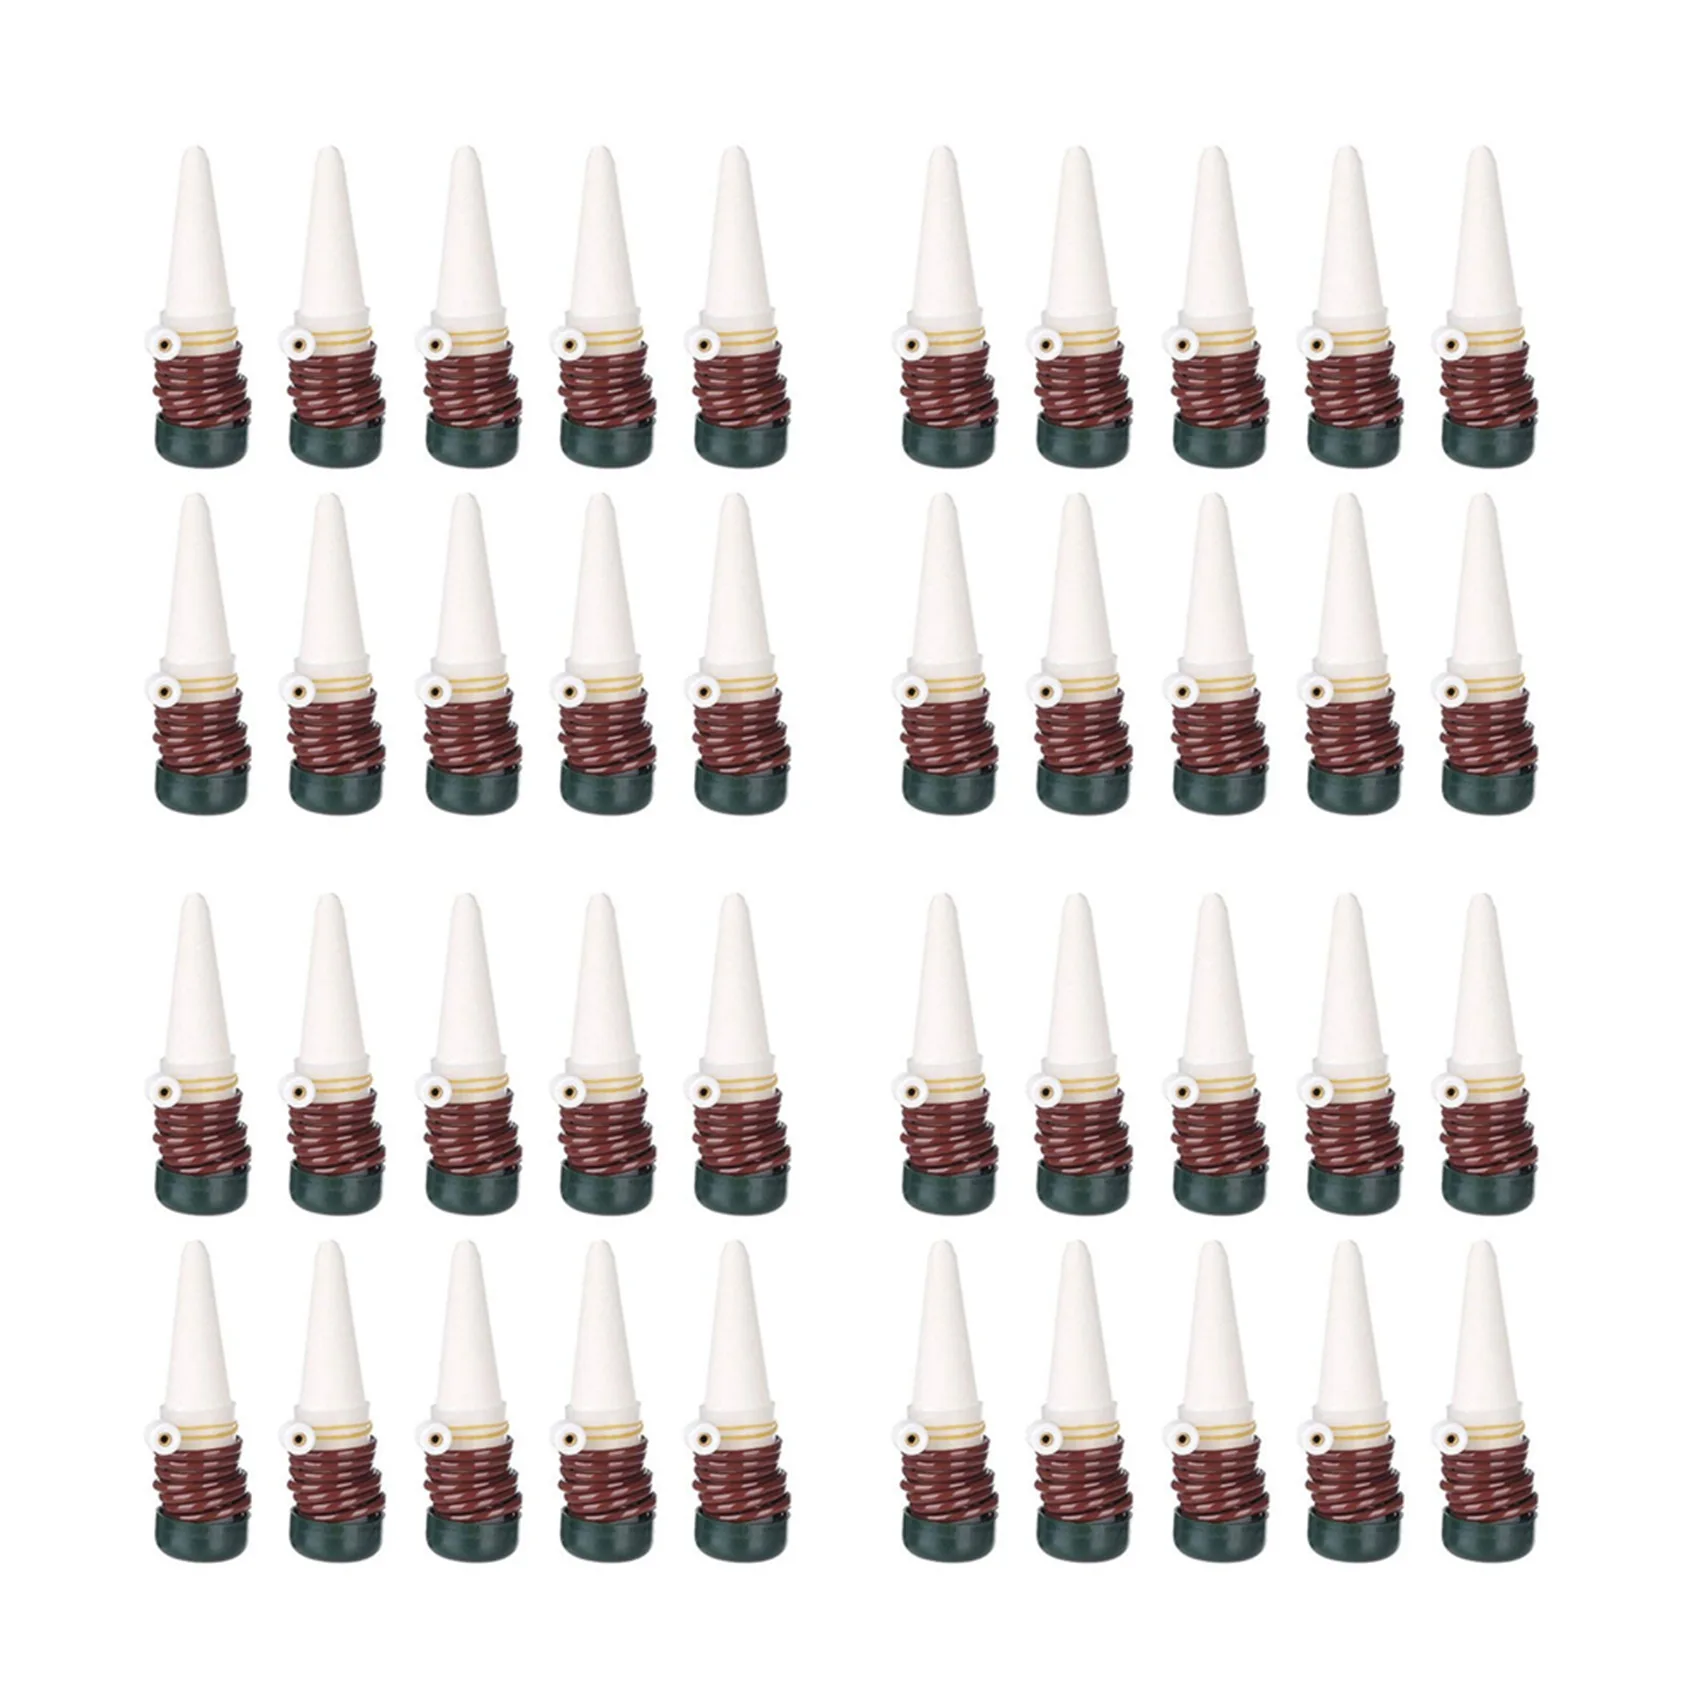 

Watering Stakes 40 Pack Indoor Automatic Drip Watering System Irrigation Equipment Tool for Plant Waterer Ceramic Probes